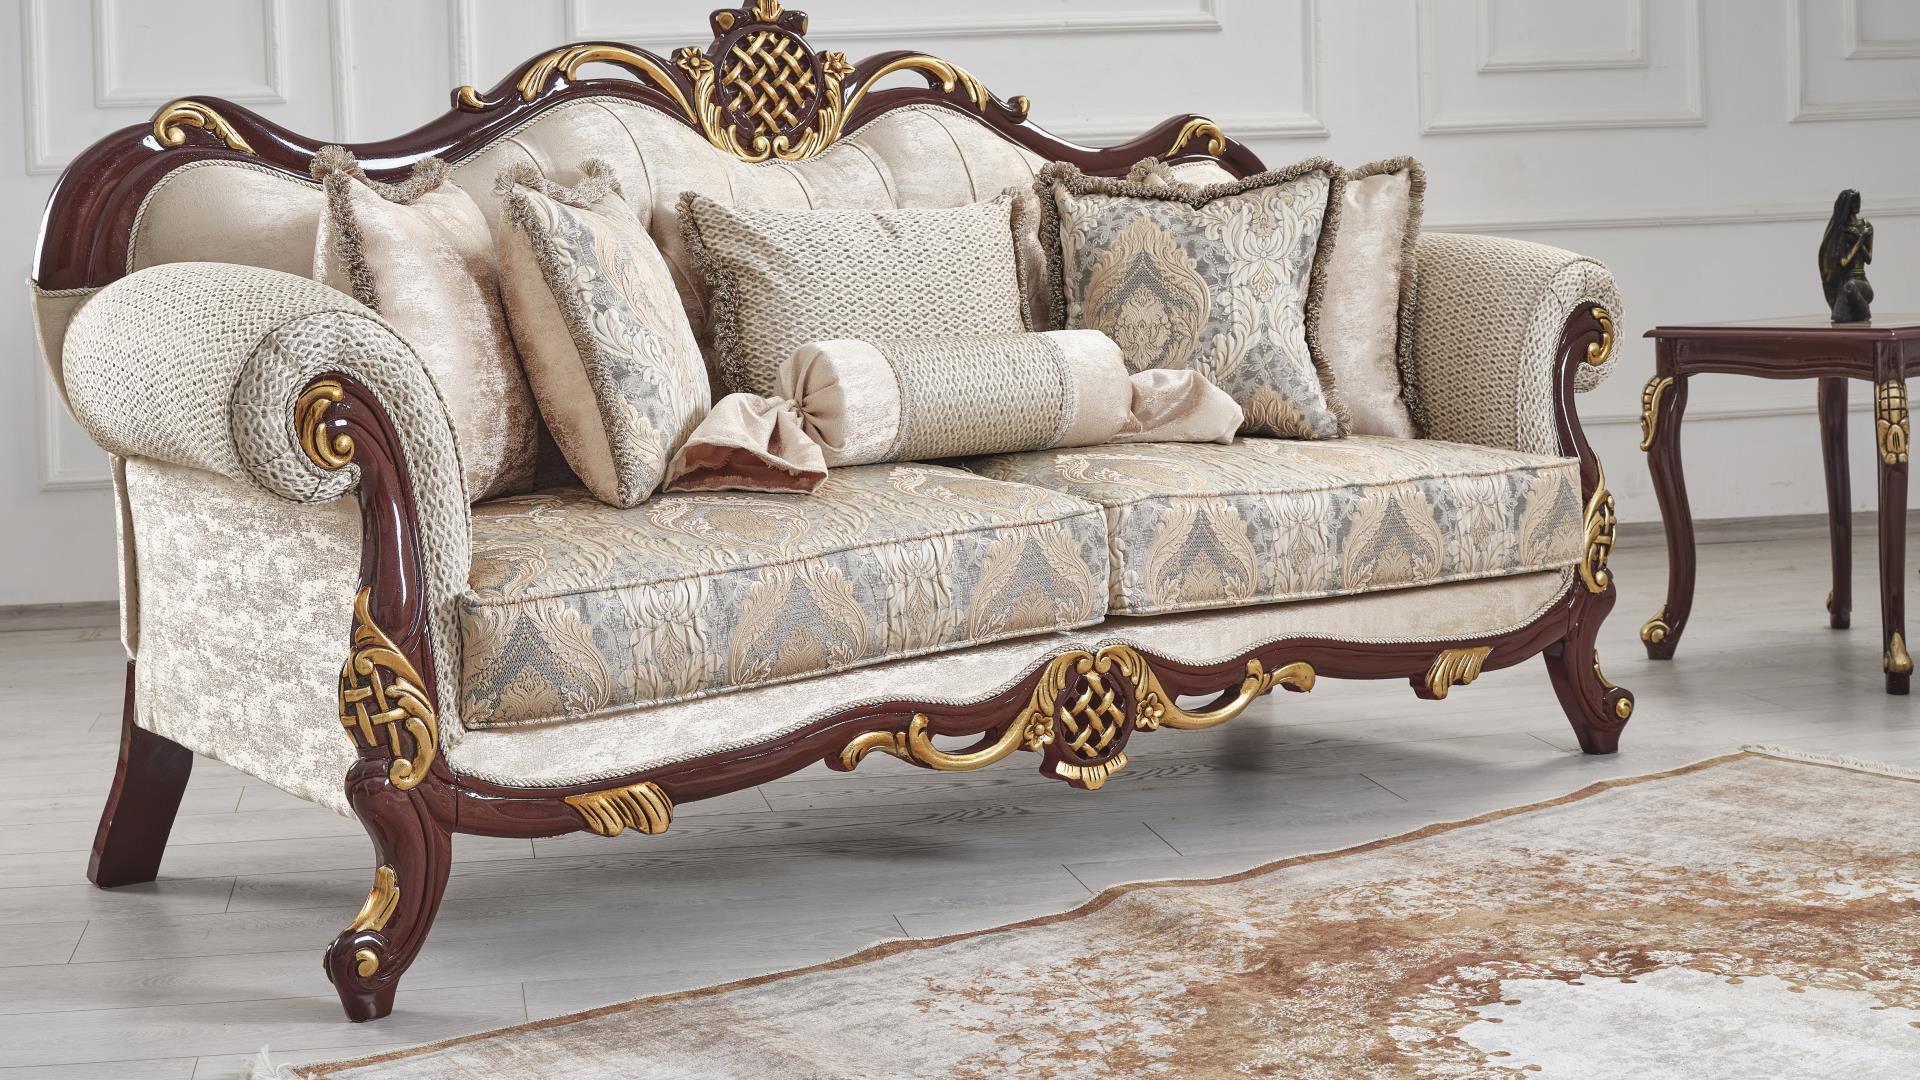 Classic, Traditional Sofa ANGELICA ANGELICA-S in Cherry, Beige Chenille